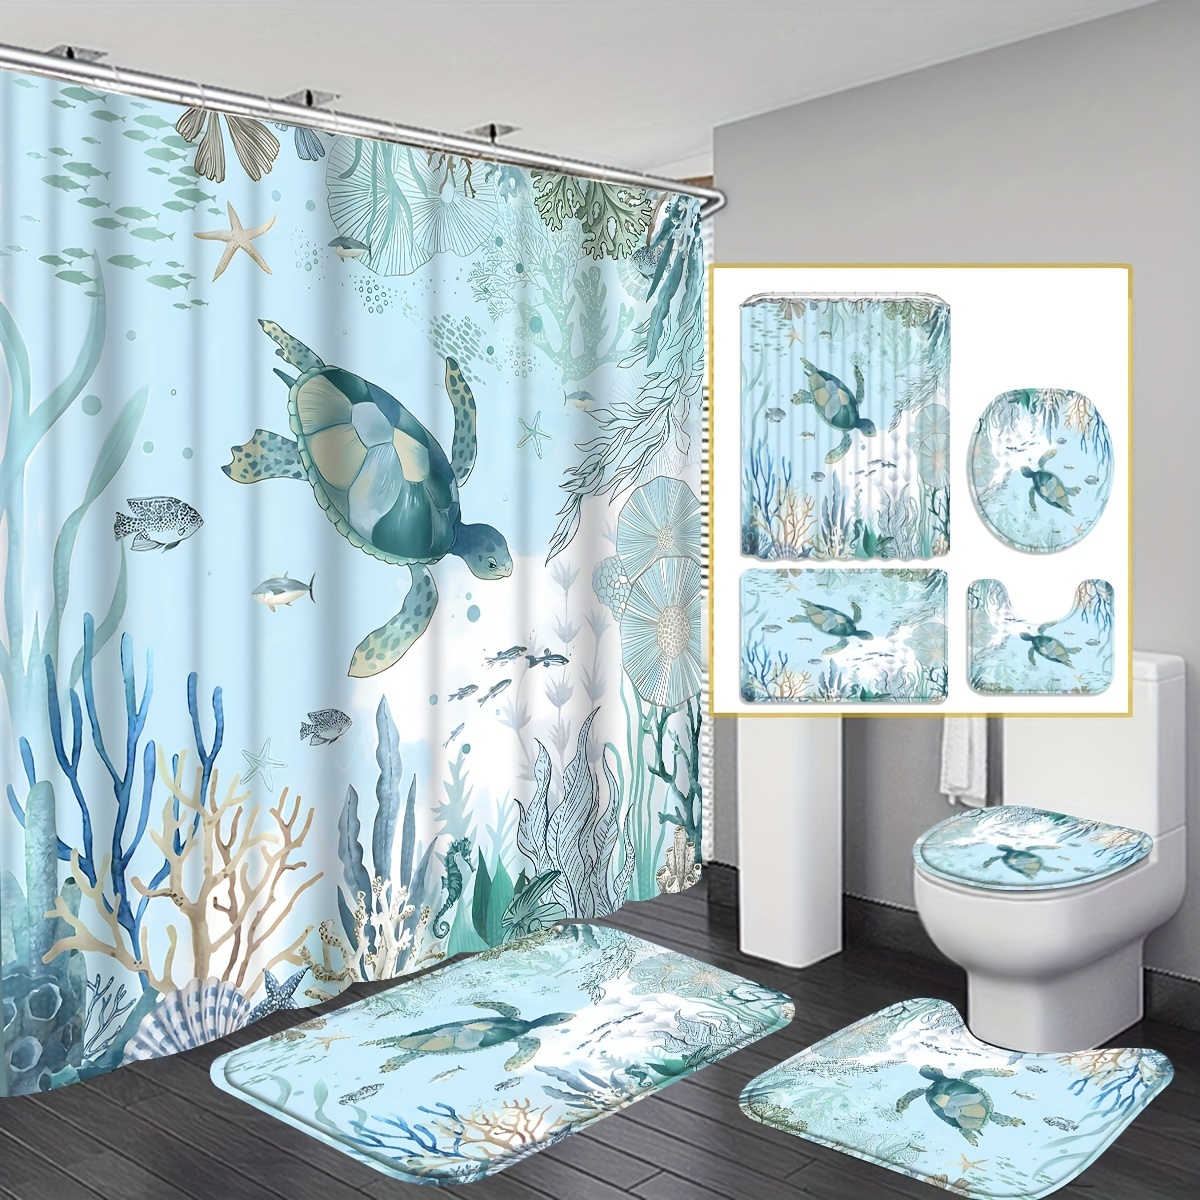 Sea Turtle Bathroom Sets Decor with Shower Curtain and Rugs and Accessories  Under The Sea 4 Piece Shower Curtain Sets with 12 Hooks with Non-Slip Rug  Toilet Lid Cover and Bath Mat 